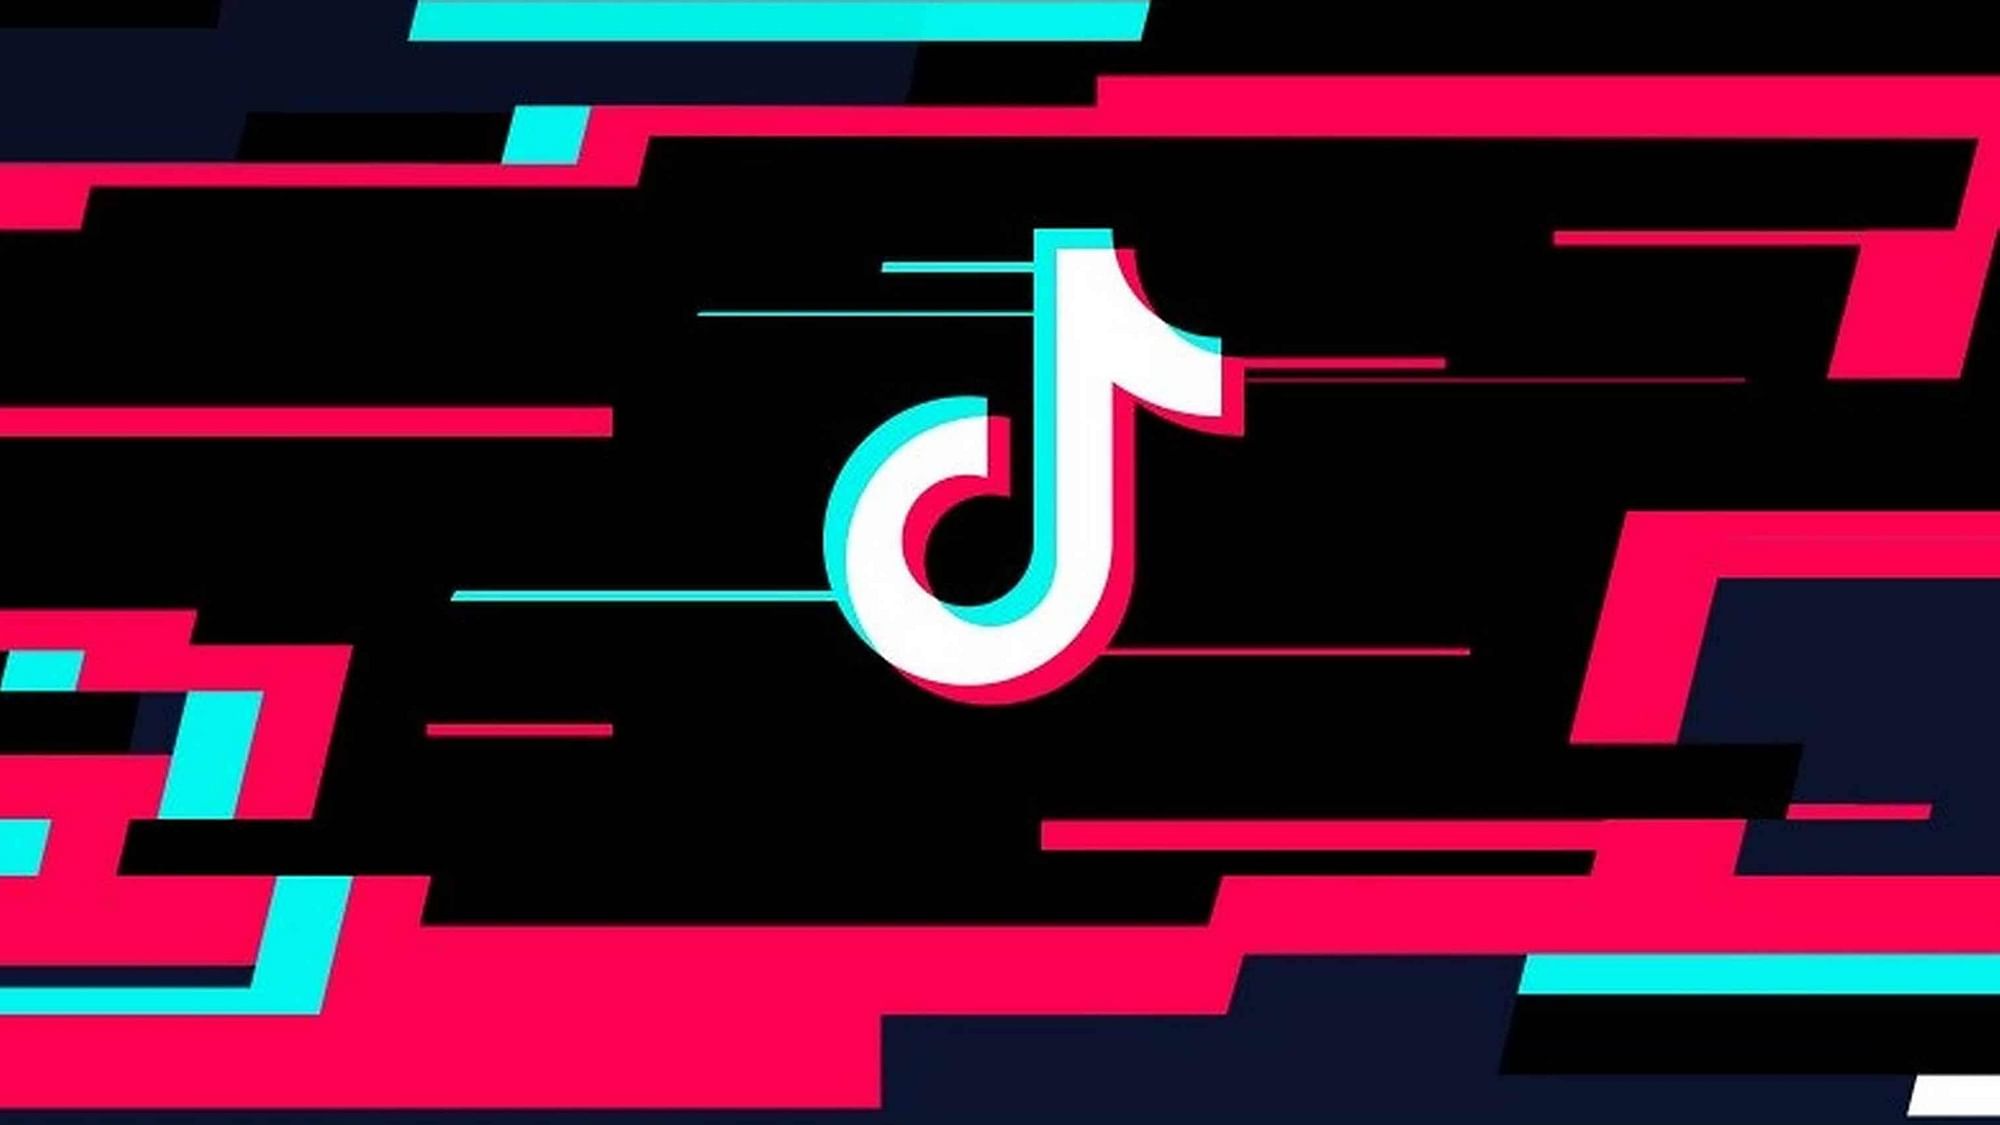 Tik Tok has over 52 million monthly active users in India as of January 2019.